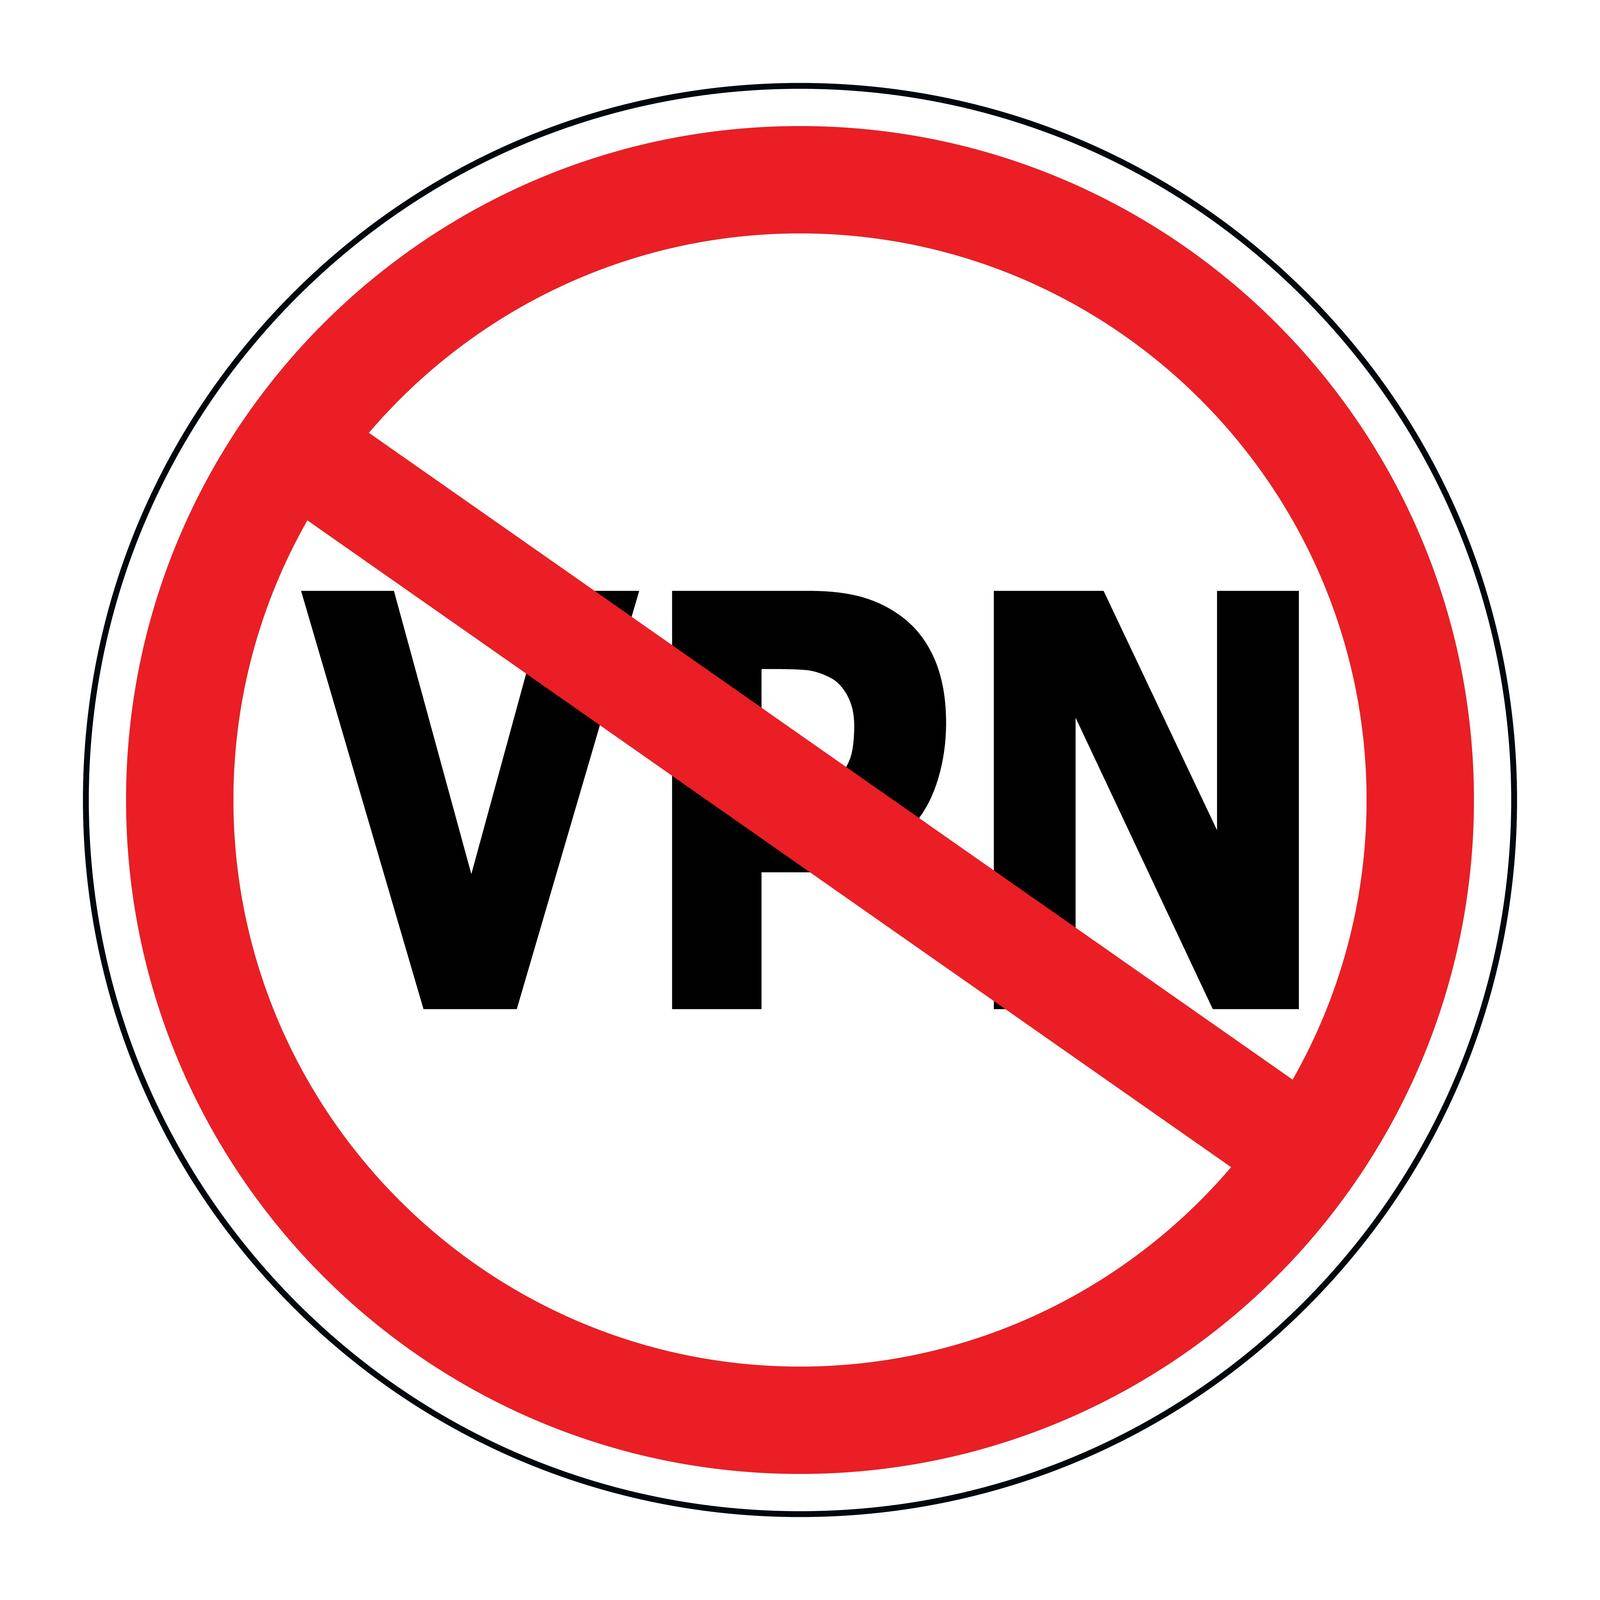 Sign prohibiting the use Anonymizer service VPN, sign vector red crossed out circle the word VPN, Virtual Private Network by koksikoks